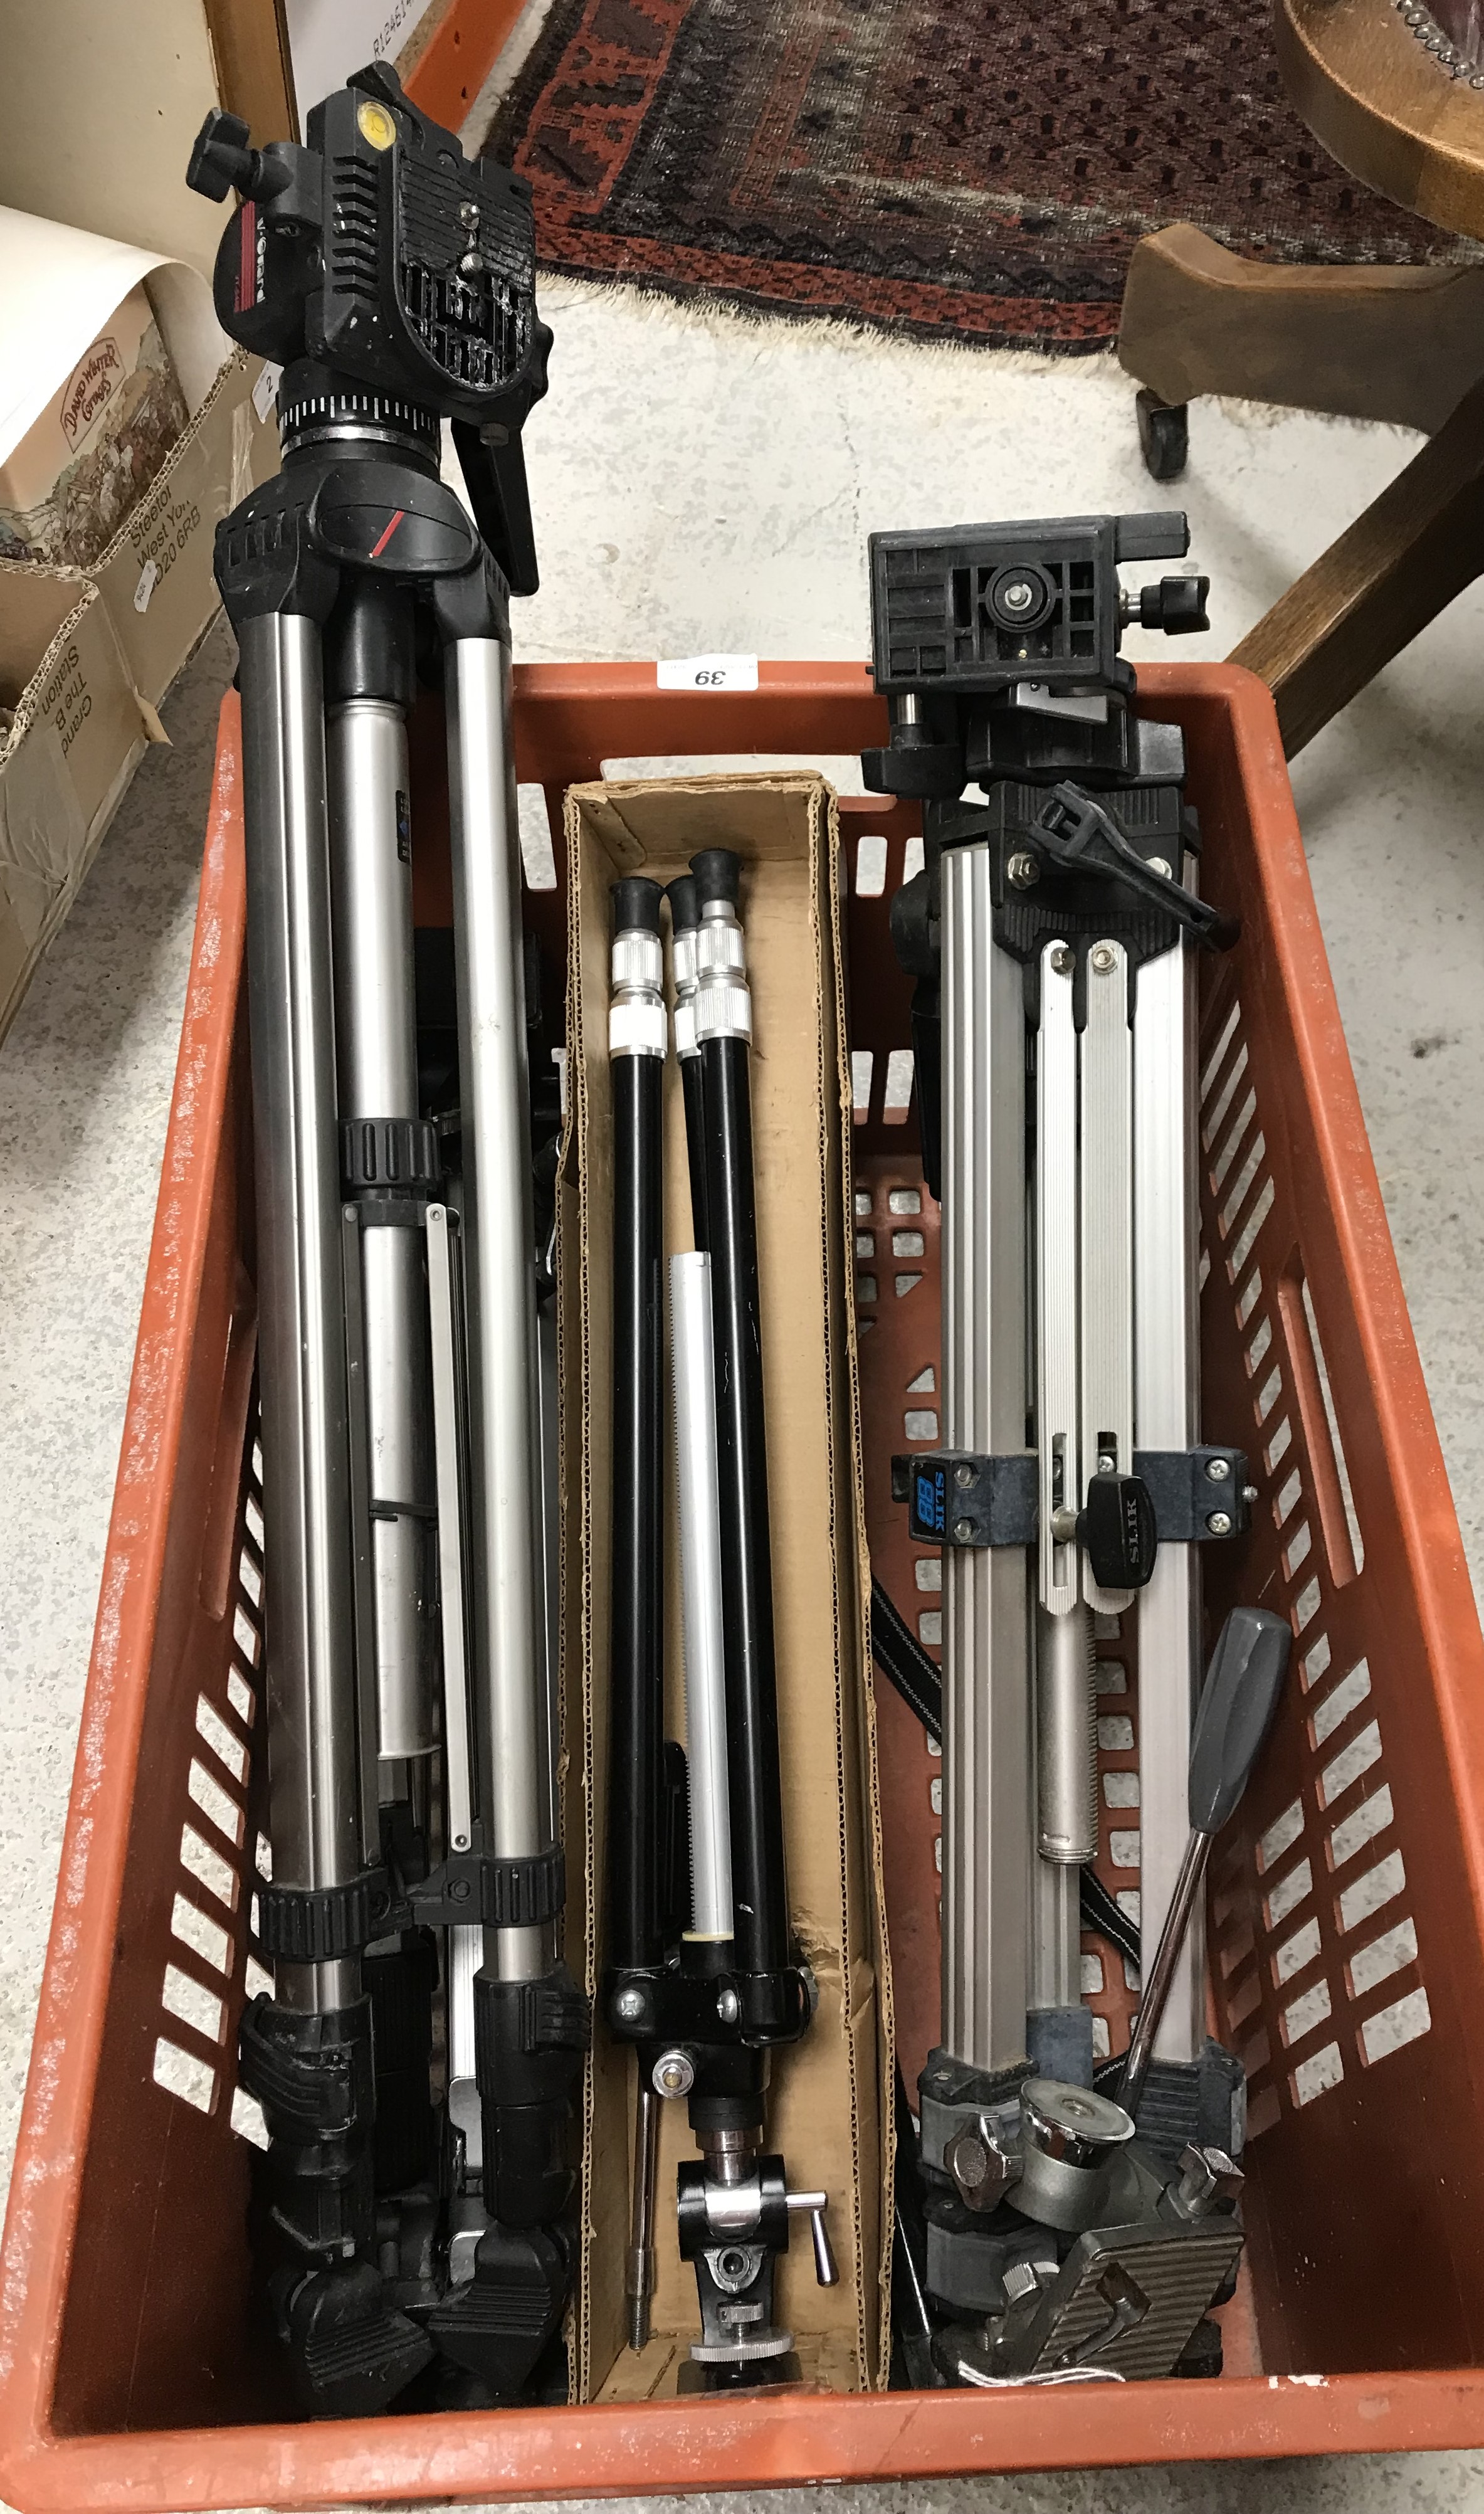 A crate containing various camera tripods